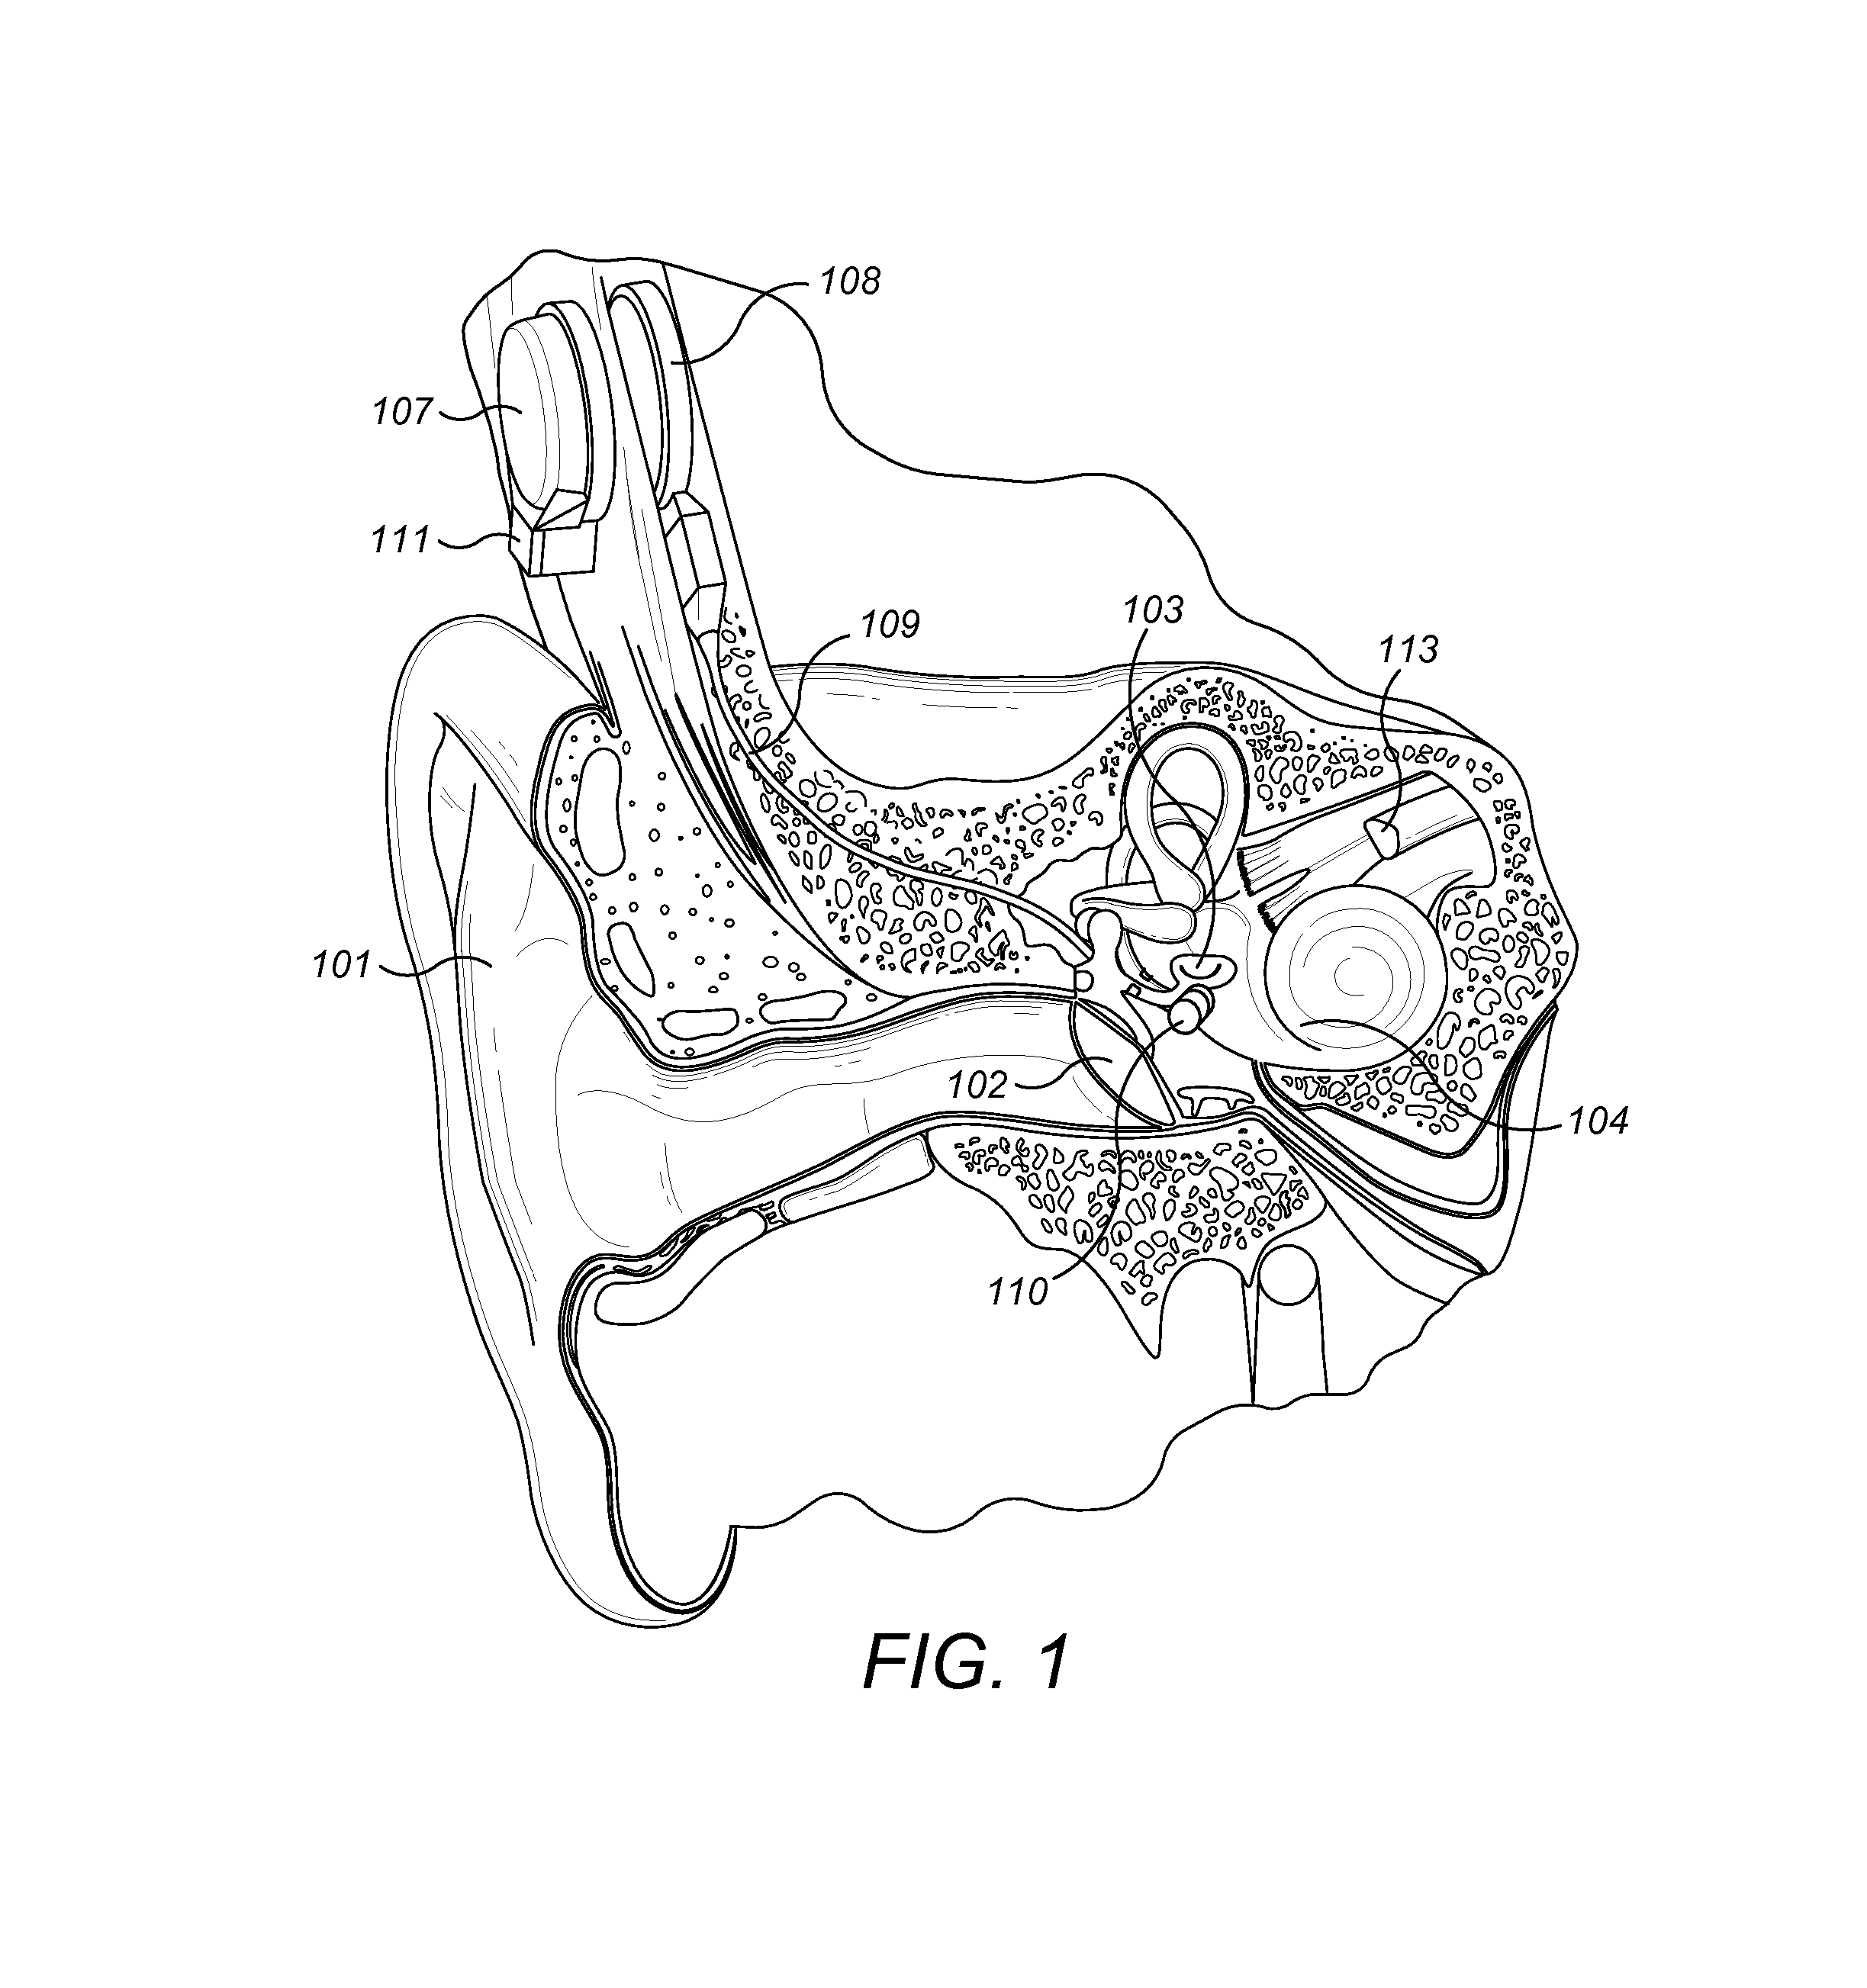 Clover Shape Attachment for Implantable Floating Mass Transducer